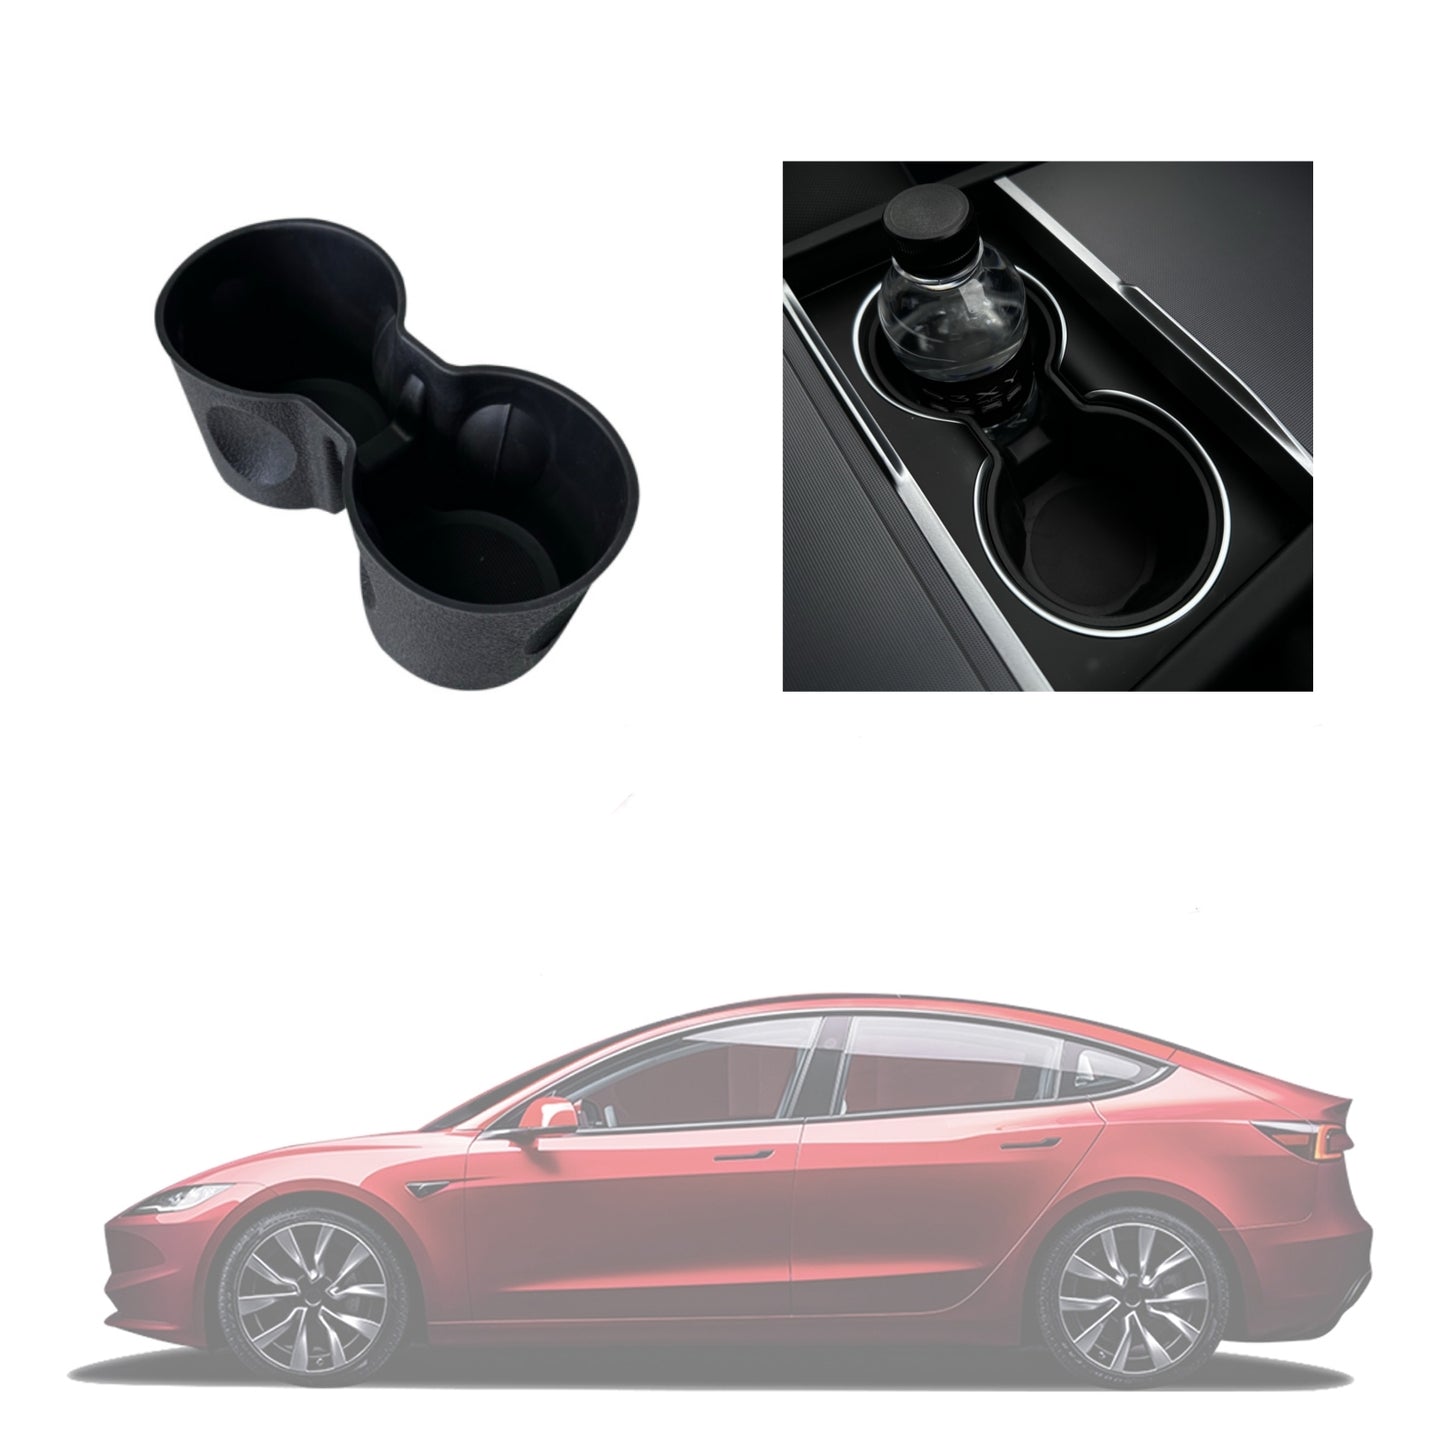 Center Console Two-Cups Holder for Model 3 Highland